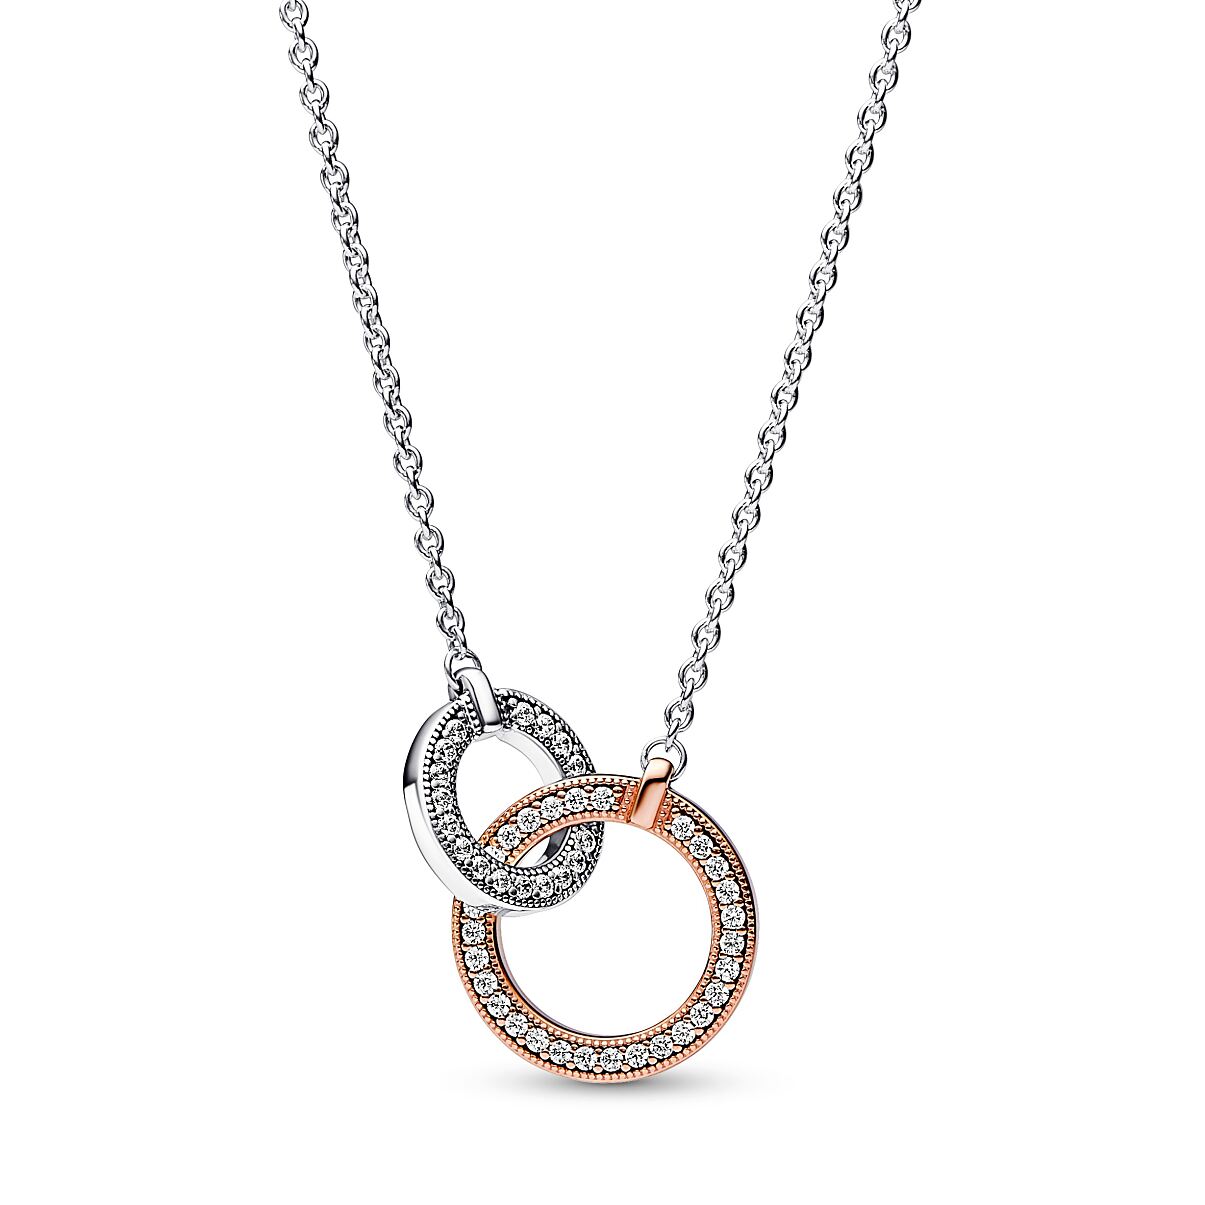 Pandora_Necklace_Sterling Silver_14k Rosé Gold-plated_Cubic Zirconia_382778C01_119,00 Euro (2)